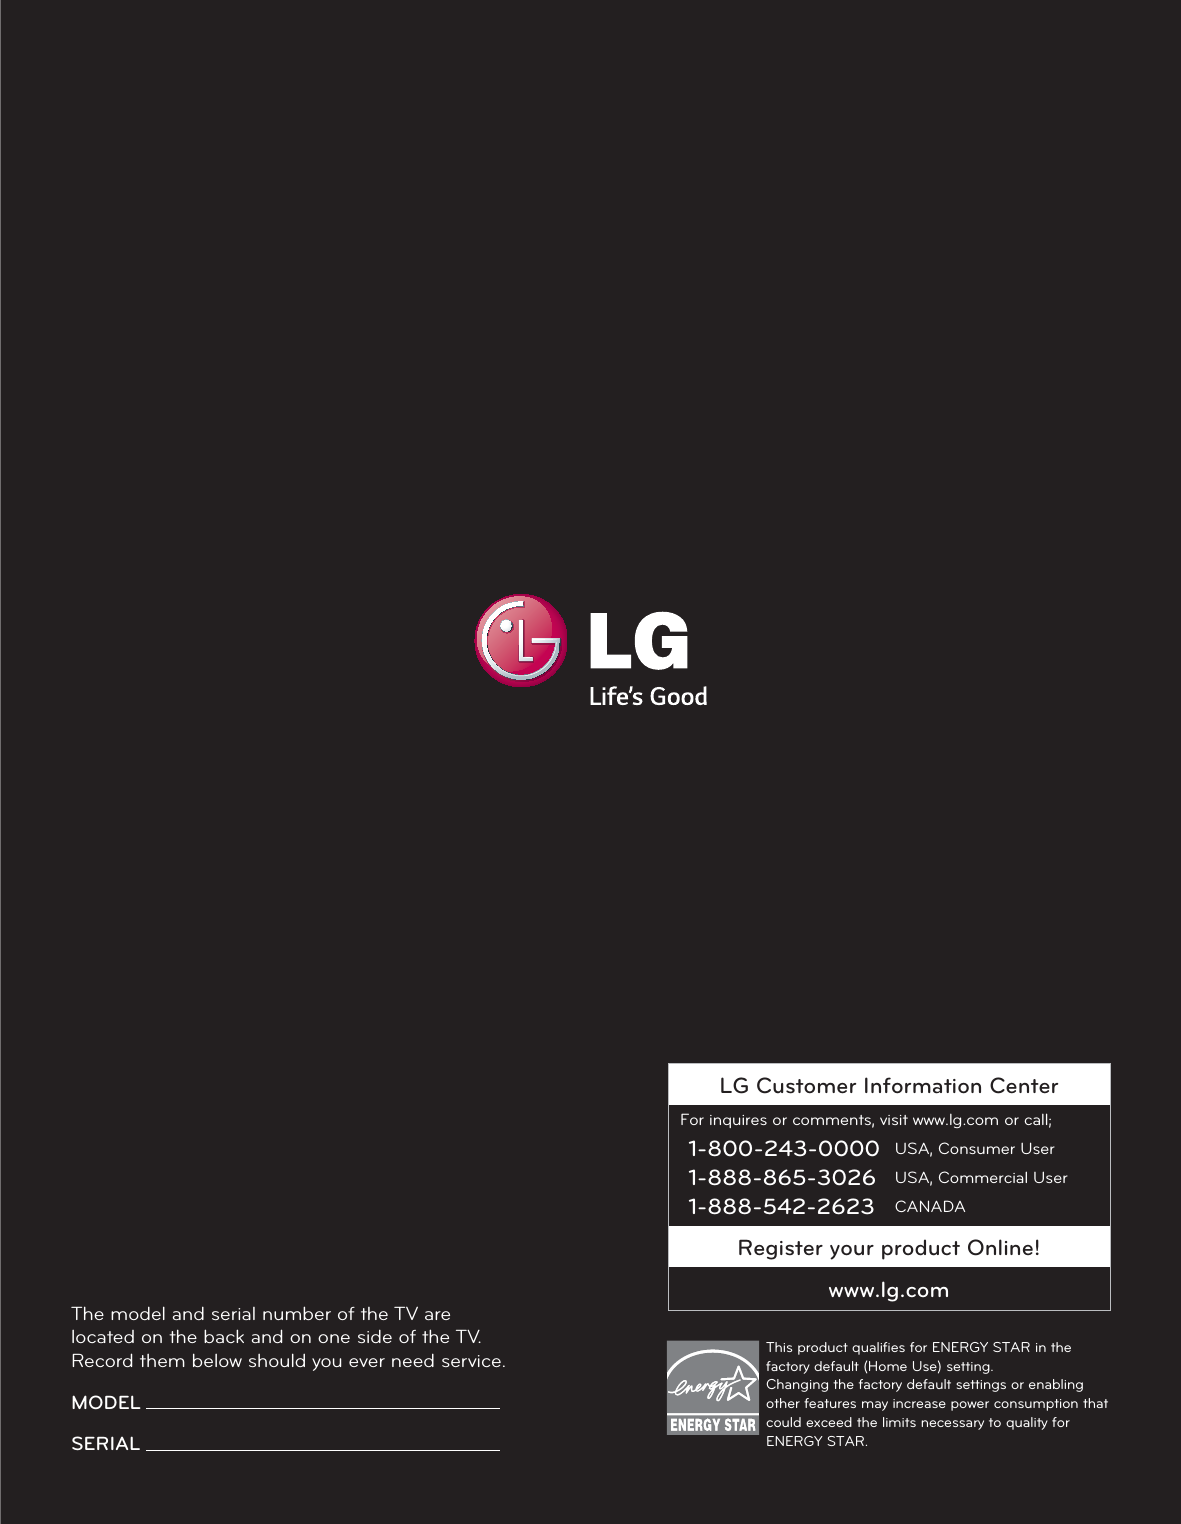 LG Customer Information CenterFor inquires or comments, visit www.lg.com or call;1-800-243-0000 USA, Consumer User1-888-865-3026 USA, Commercial User1-888-542-2623 CANADARegister your product Online!www.lg.comThe model and serial number of the TV are located on the back and on one side of the TV. Record them below should you ever need service.MODEL SERIAL This product qualiﬁes for ENERGY STAR in the factory default (Home Use) setting. Changing the factory default settings or enabling other features may increase power consumption that could exceed the limits necessary to quality for ENERGY STAR.